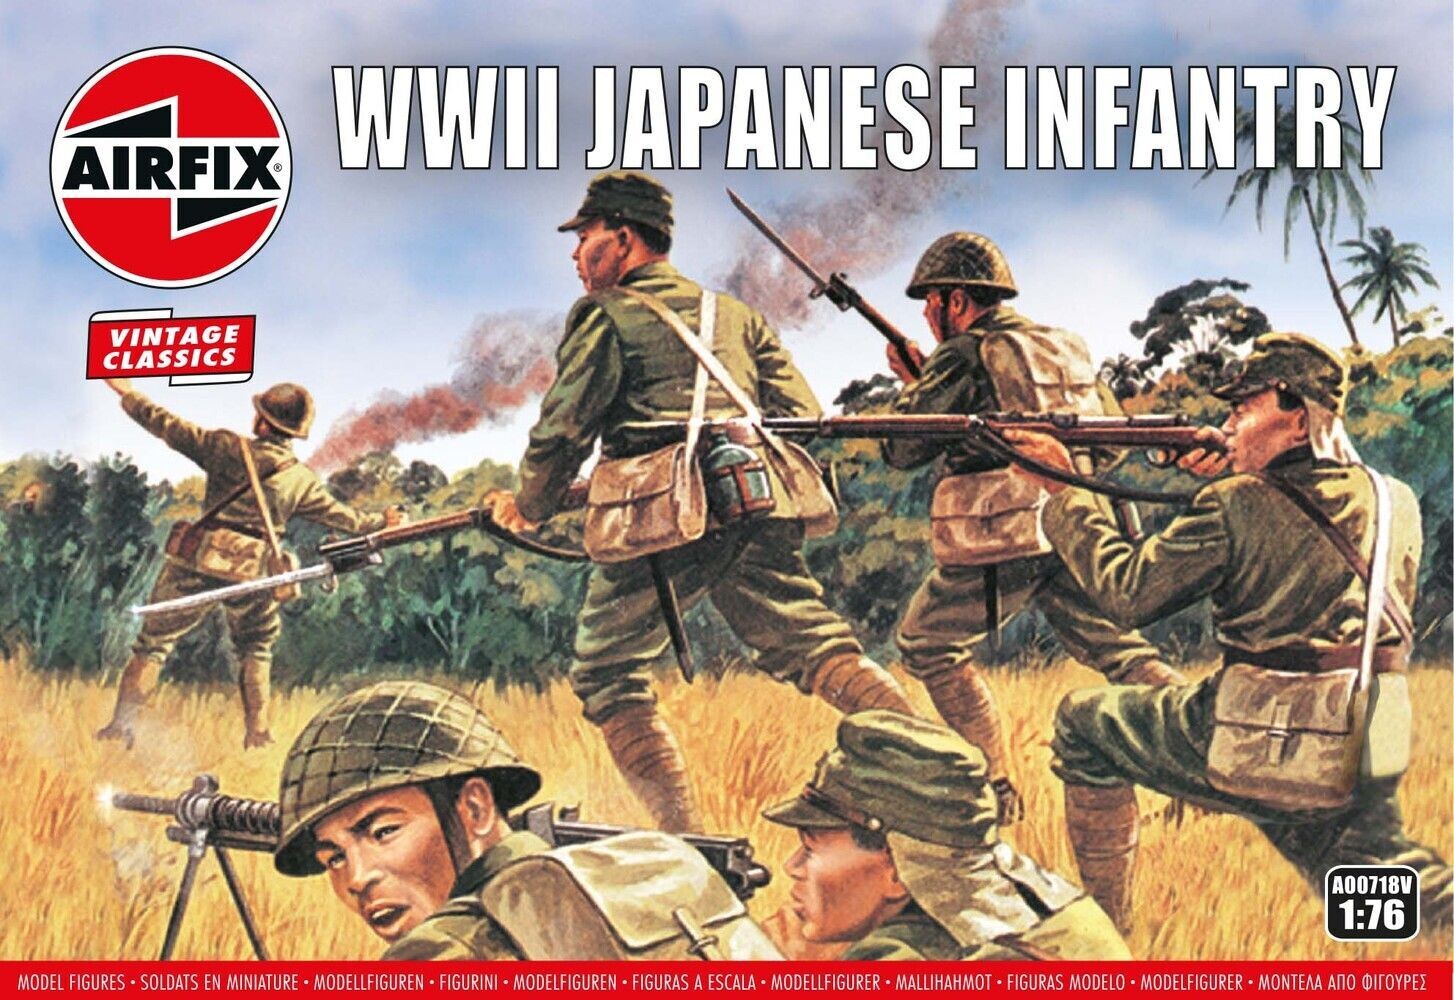 Airfix A00718V Japanese Infantry 1:76 Scale Plastic Model Military Figures